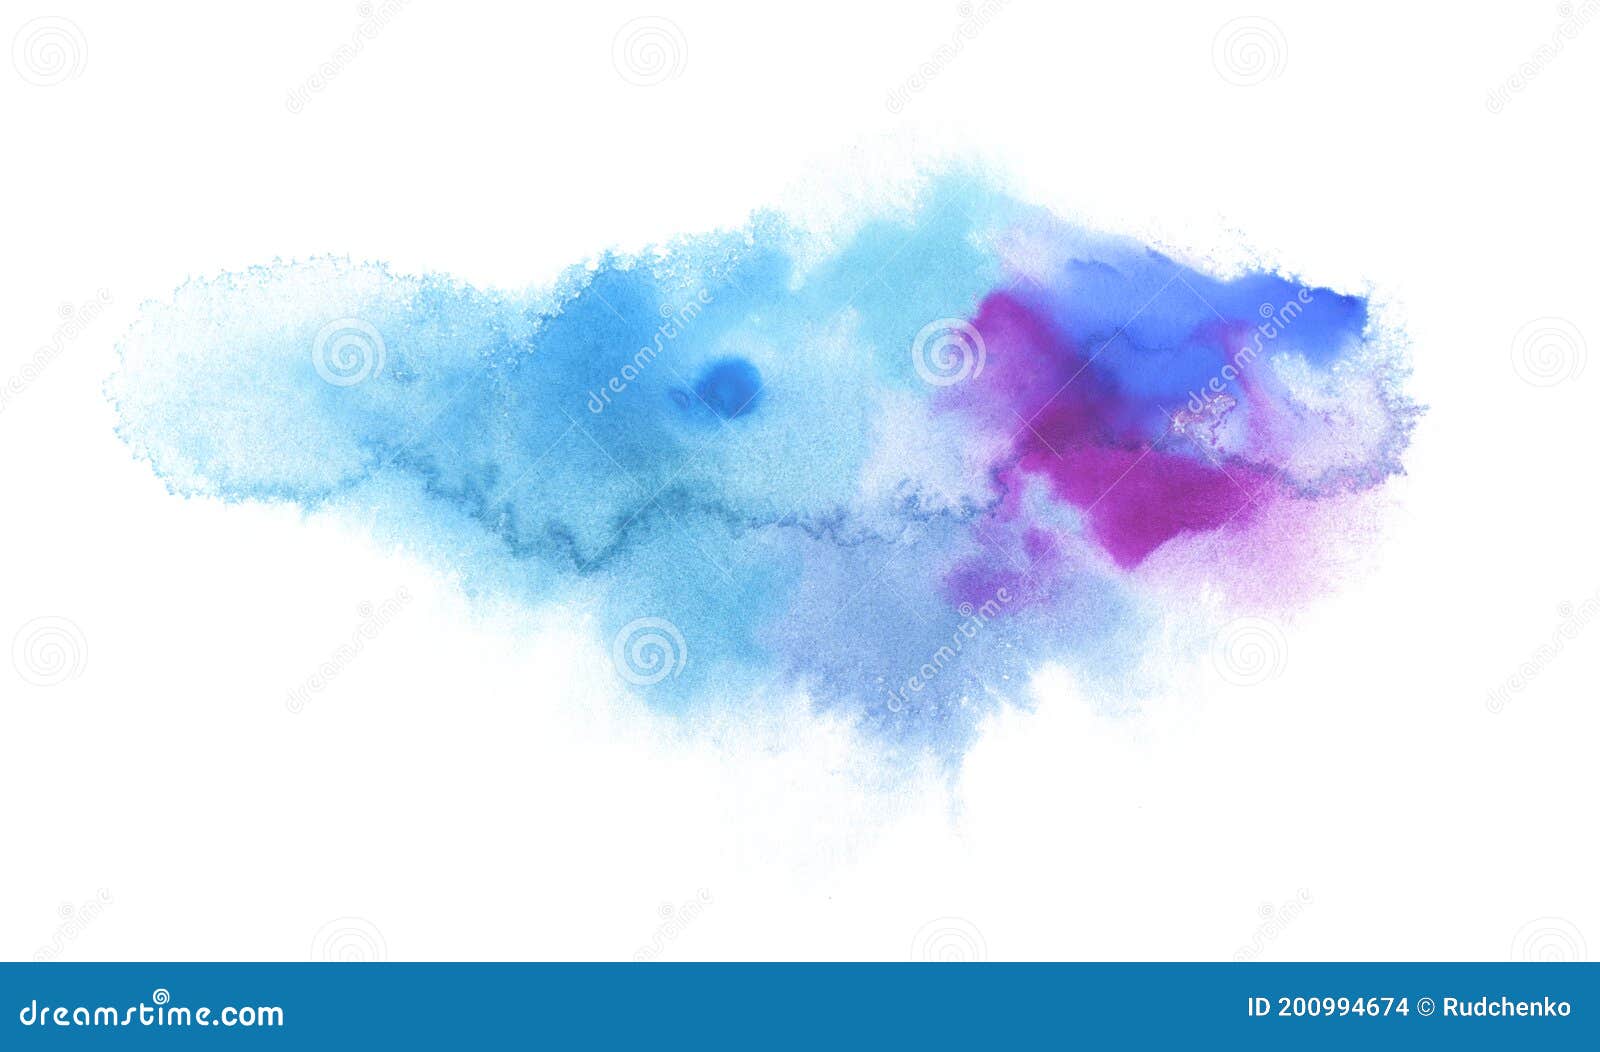 Abstract Color Watercolor Cloud And Ink Blot Painted Background Stock